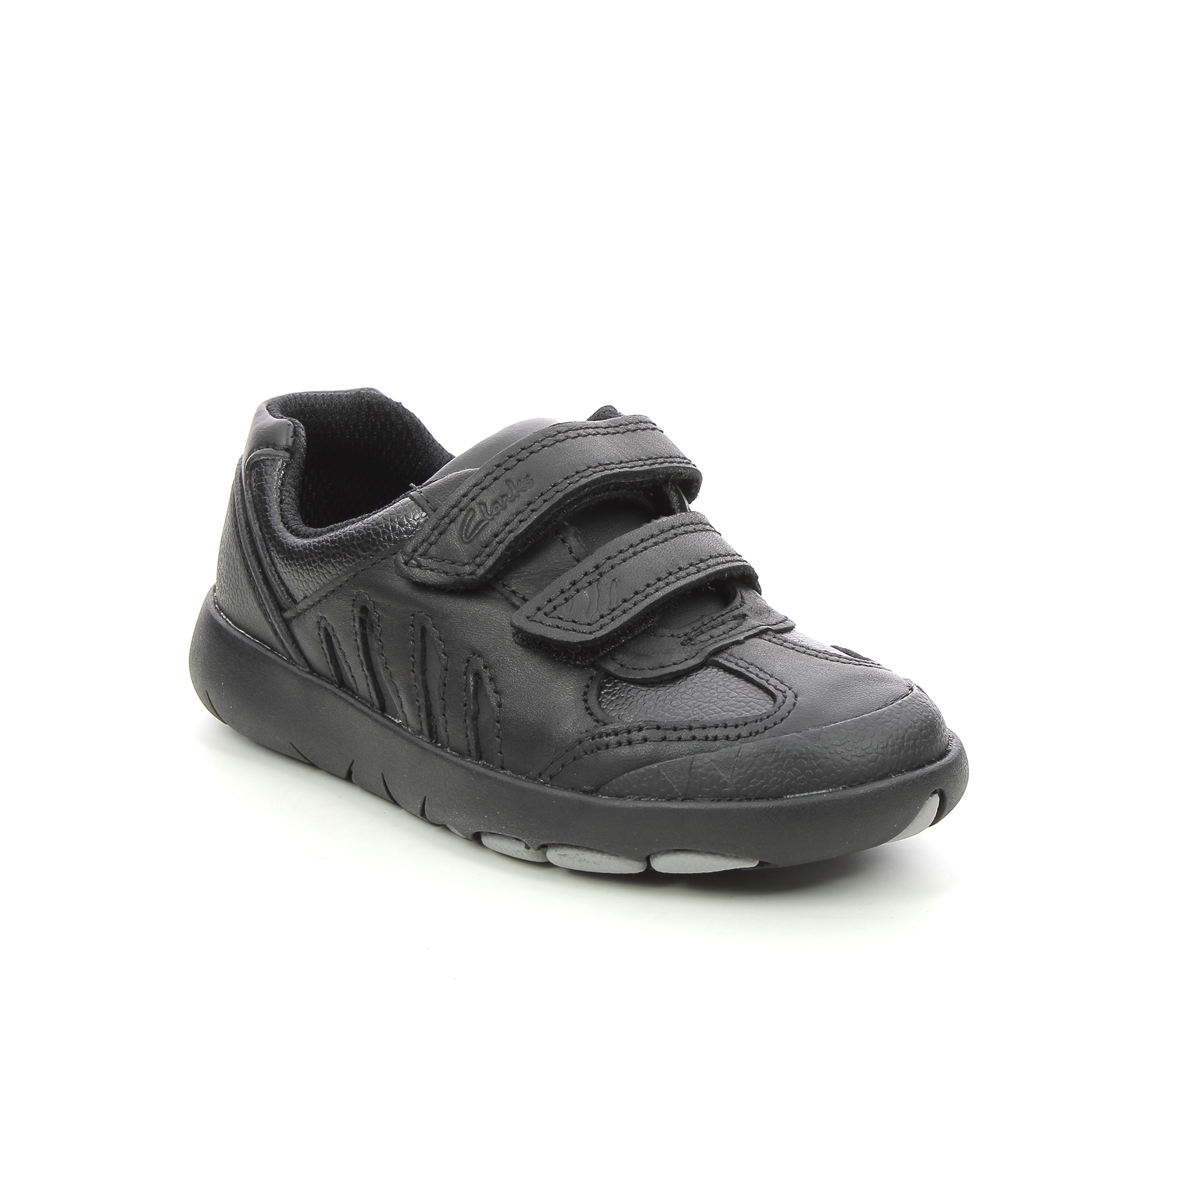 Palabra infraestructura Privación Clarks Rex Stride T G Fit Black leather Boys Casual Shoes